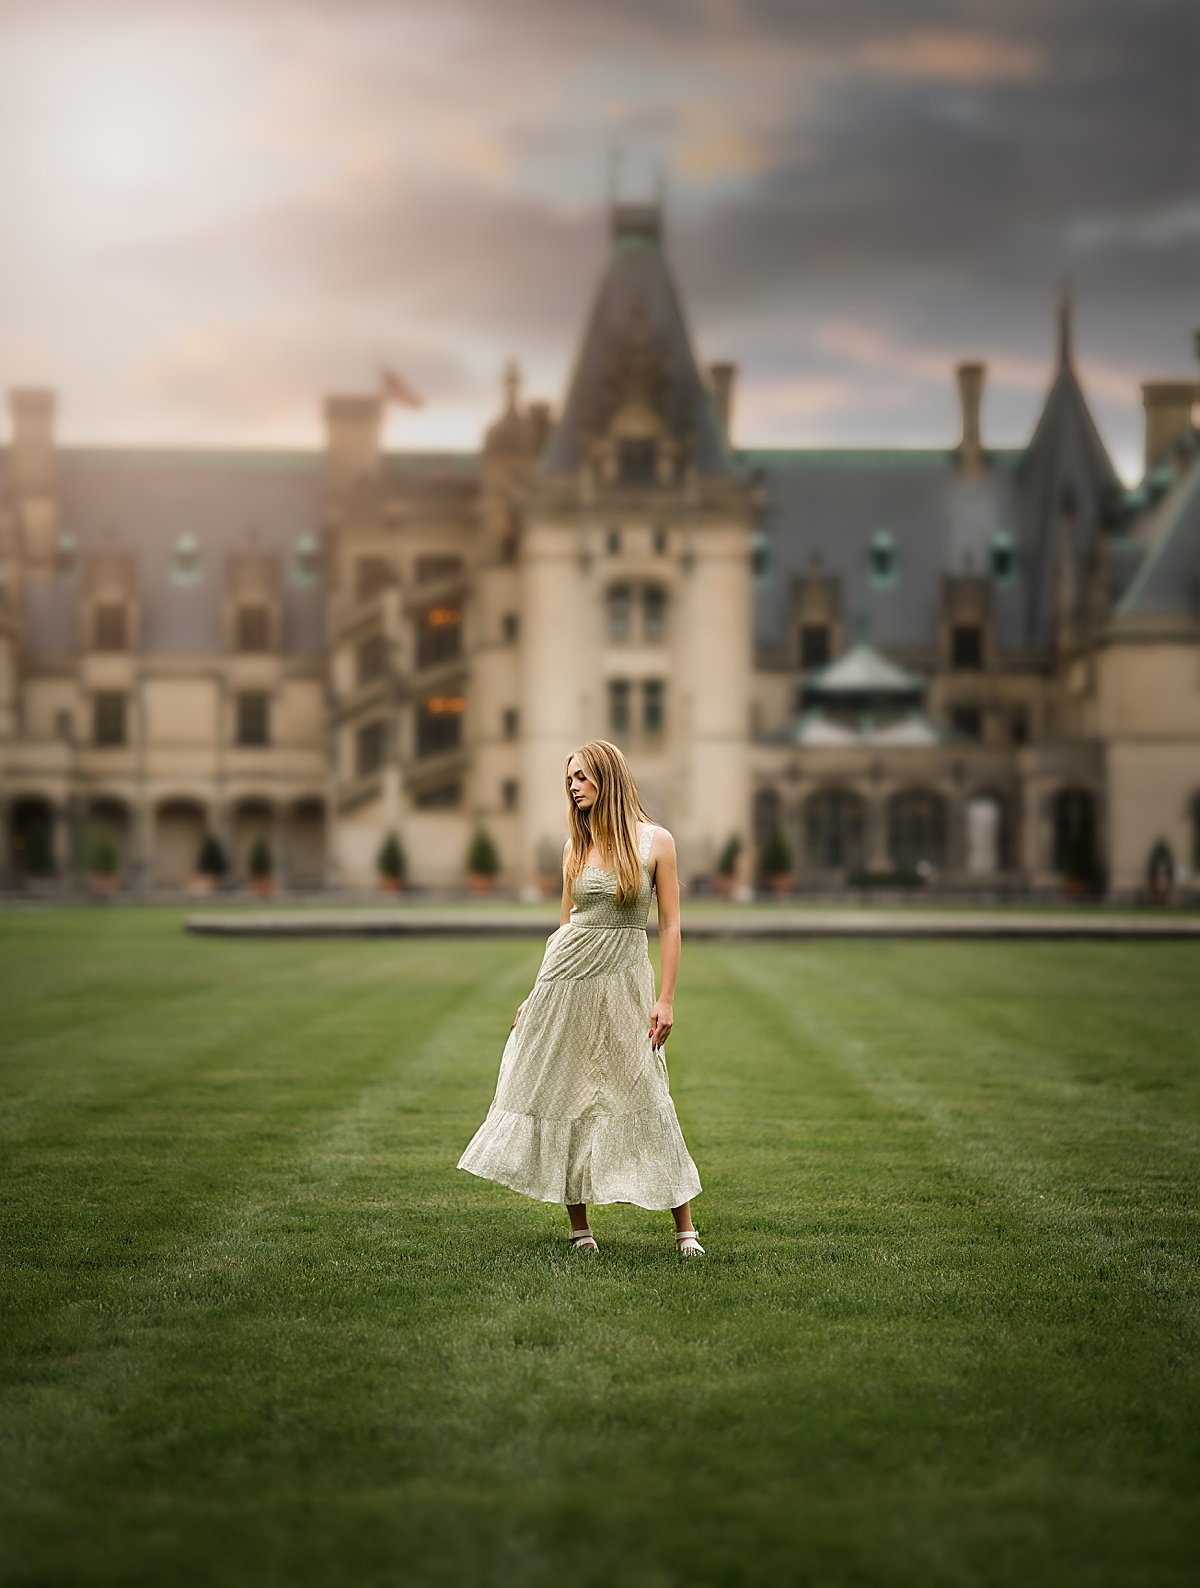 A young girl in a long green dress stands in front of the Biltmore Estate